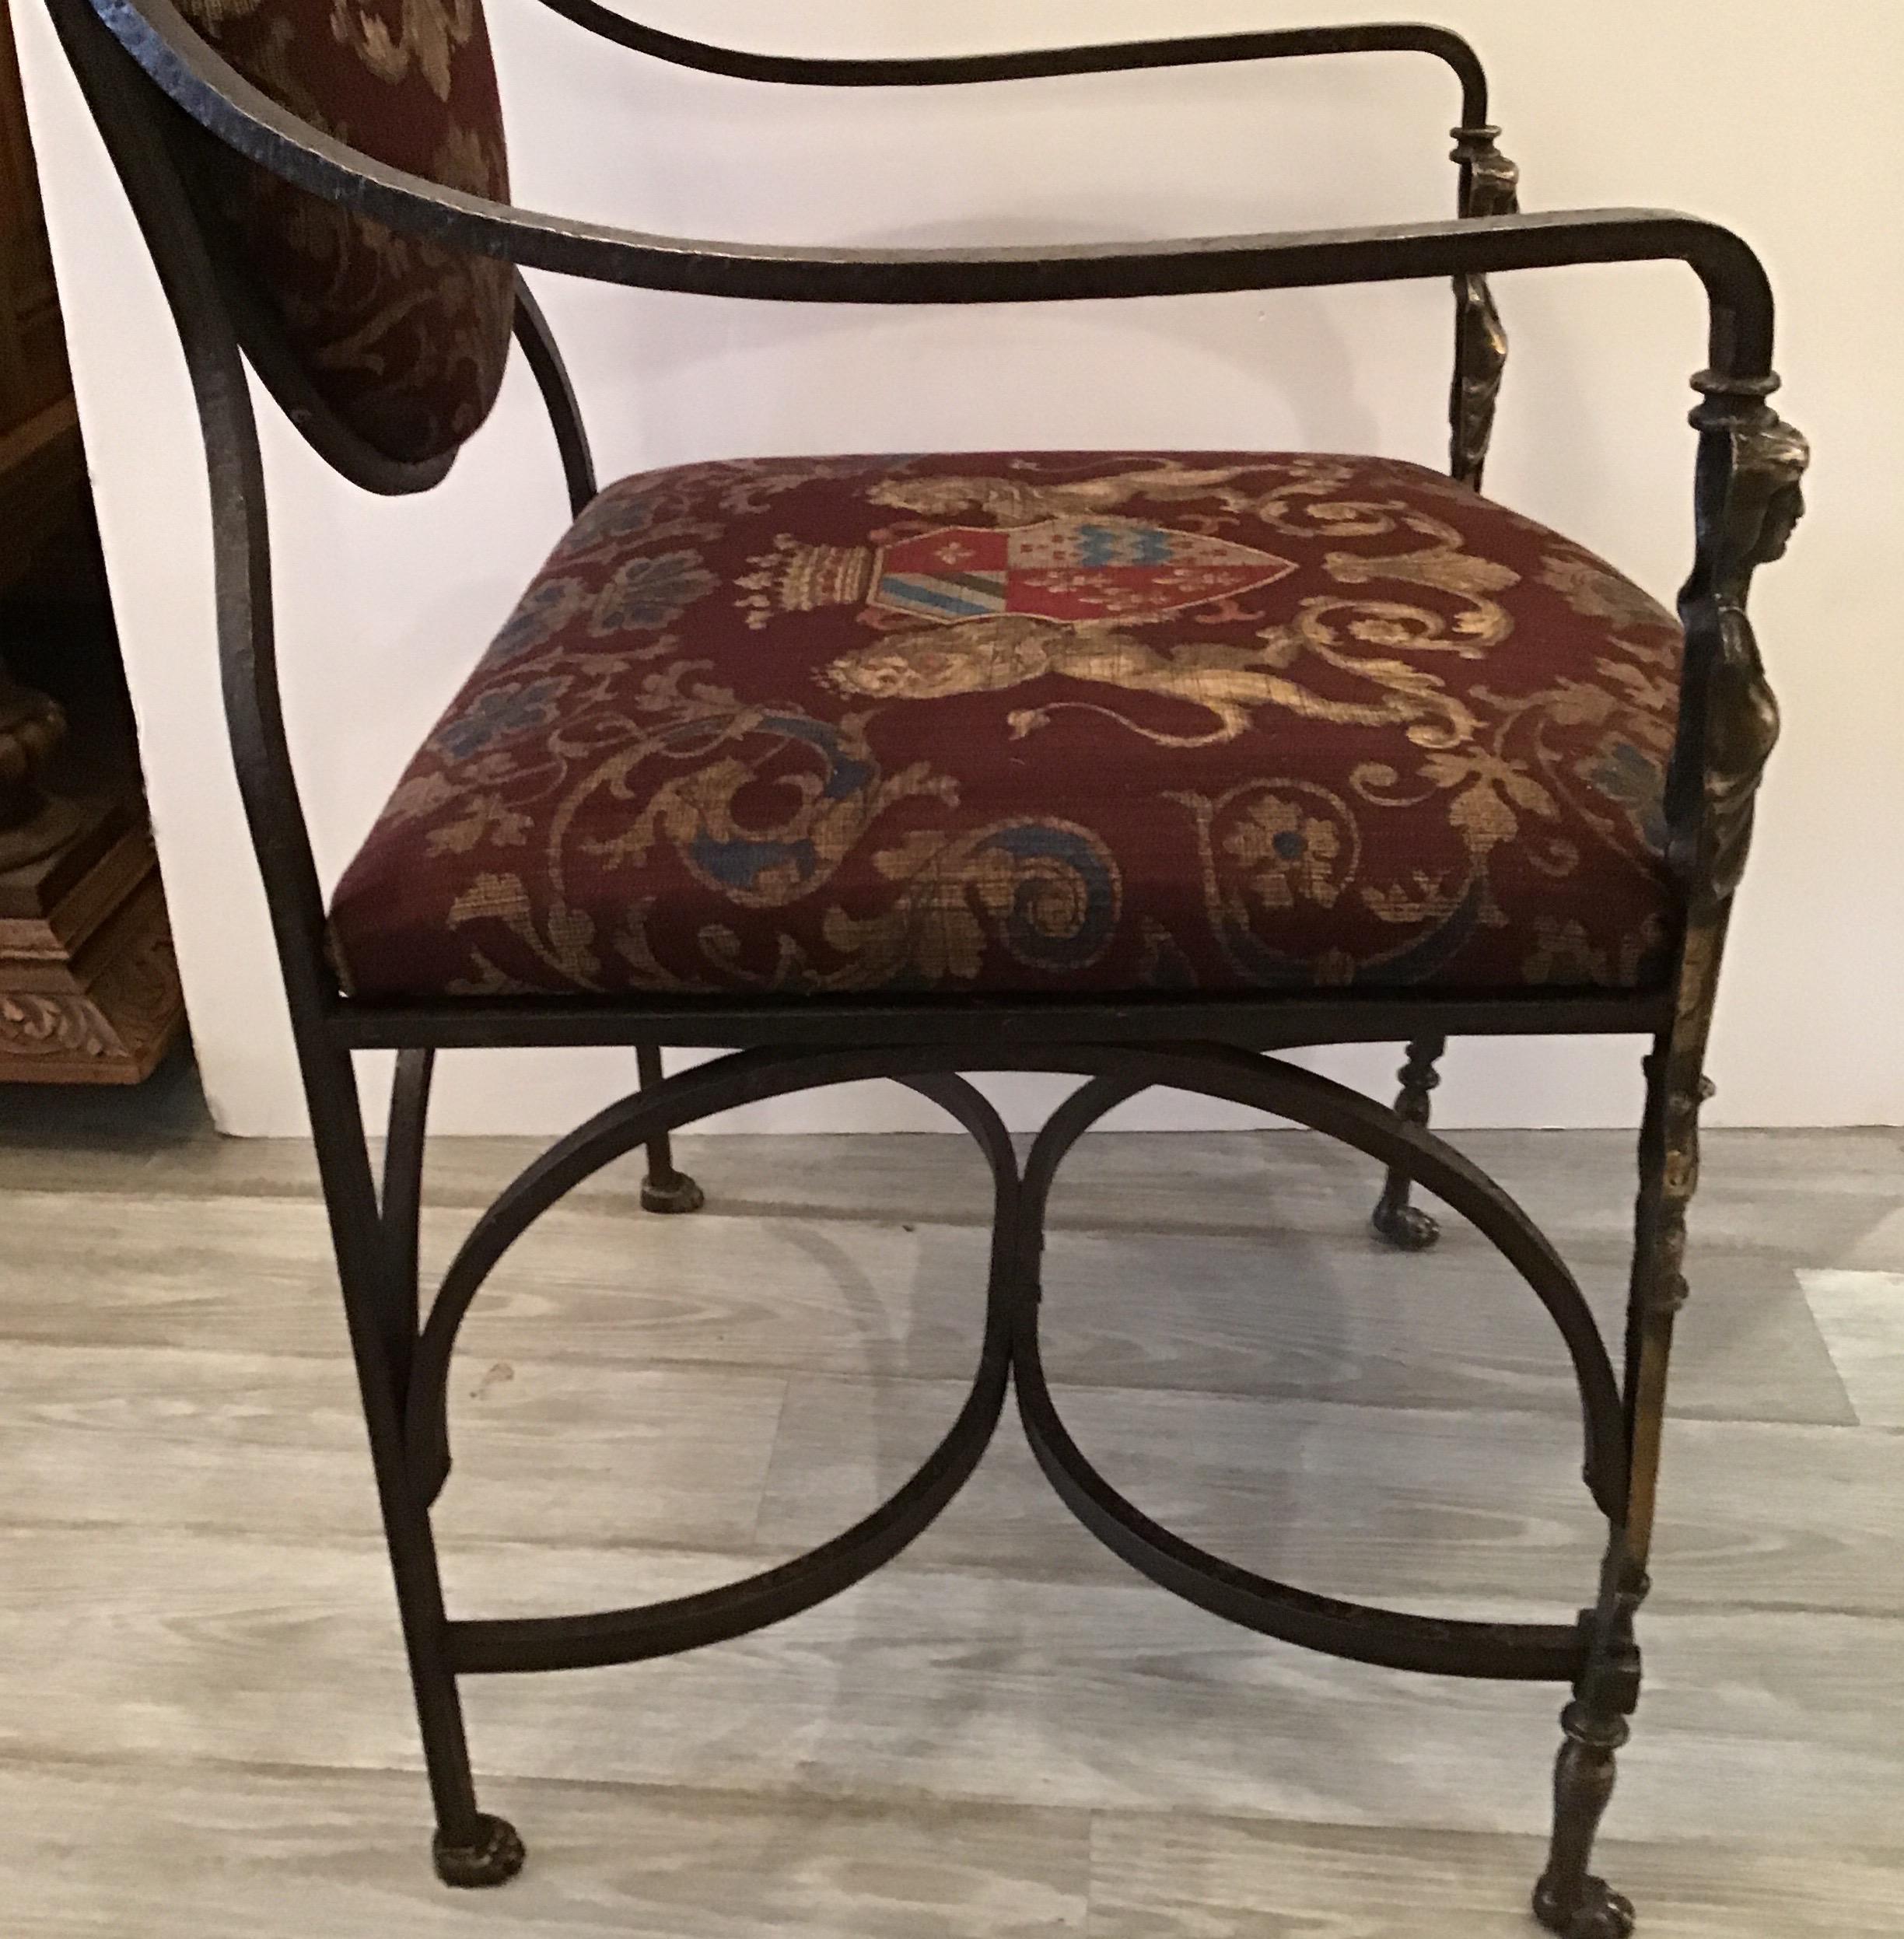 Handmade Wrought Iron & Burnished Brass Throne Chair with Armorial Fabric, 1890s For Sale 5